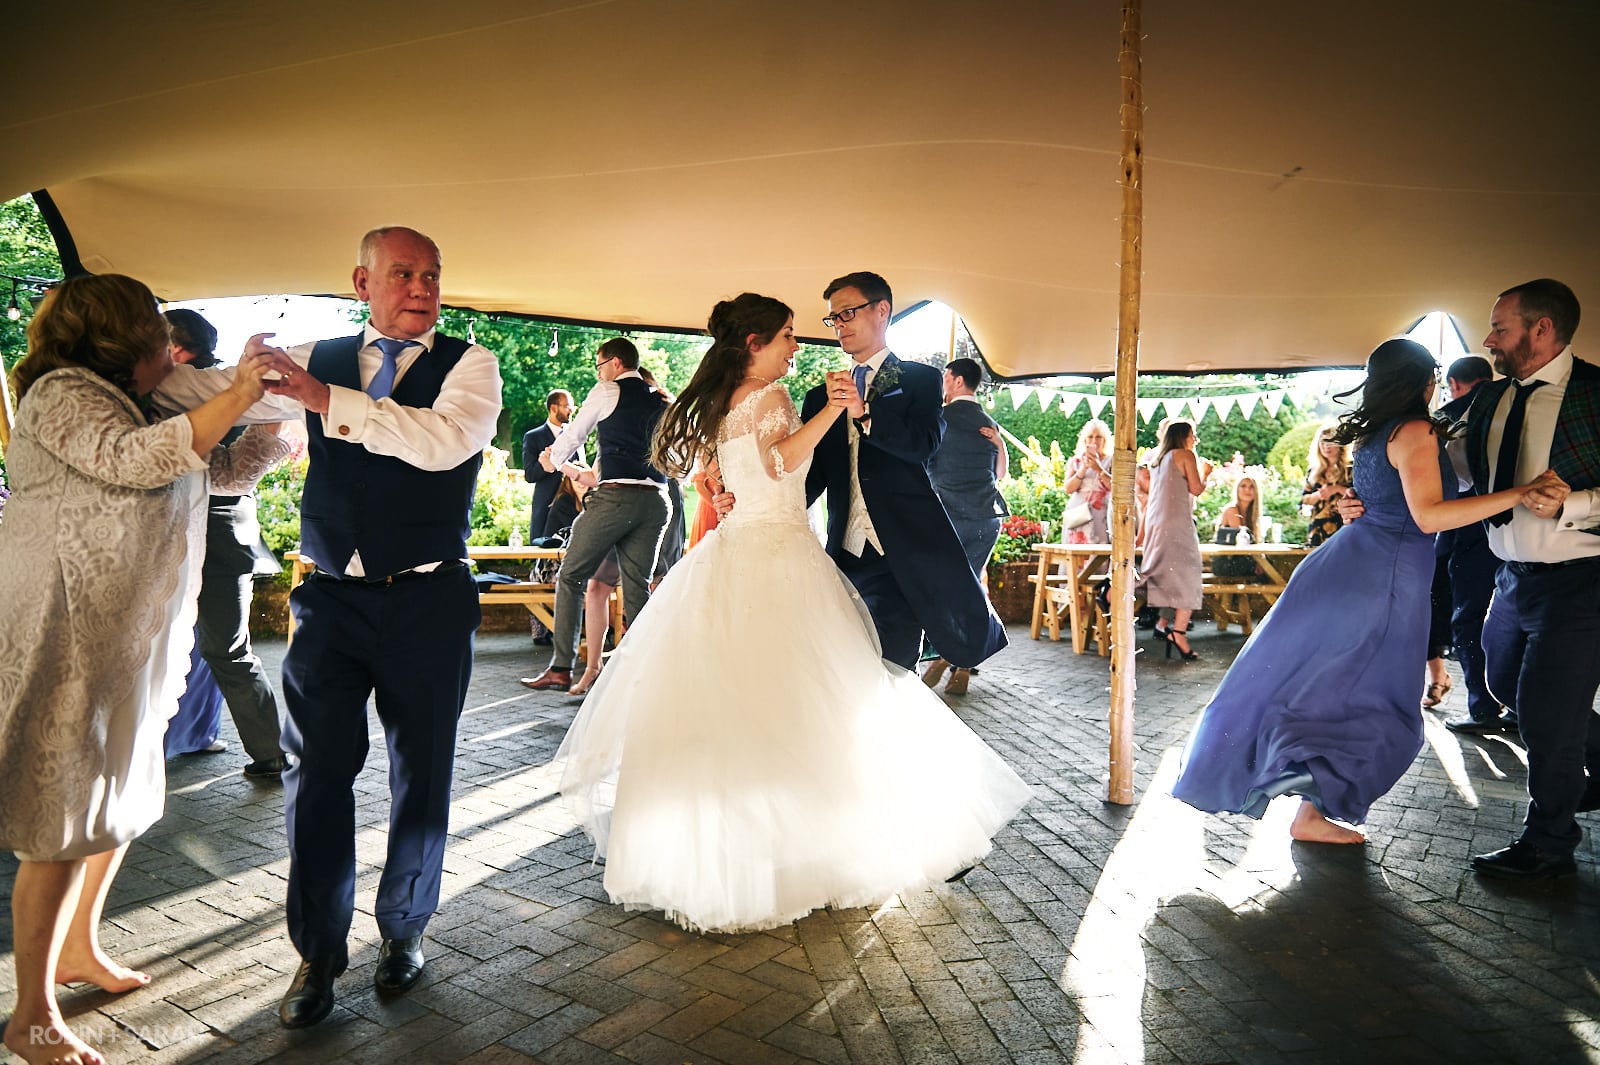 Bride, groom and guests dance to ceilidh